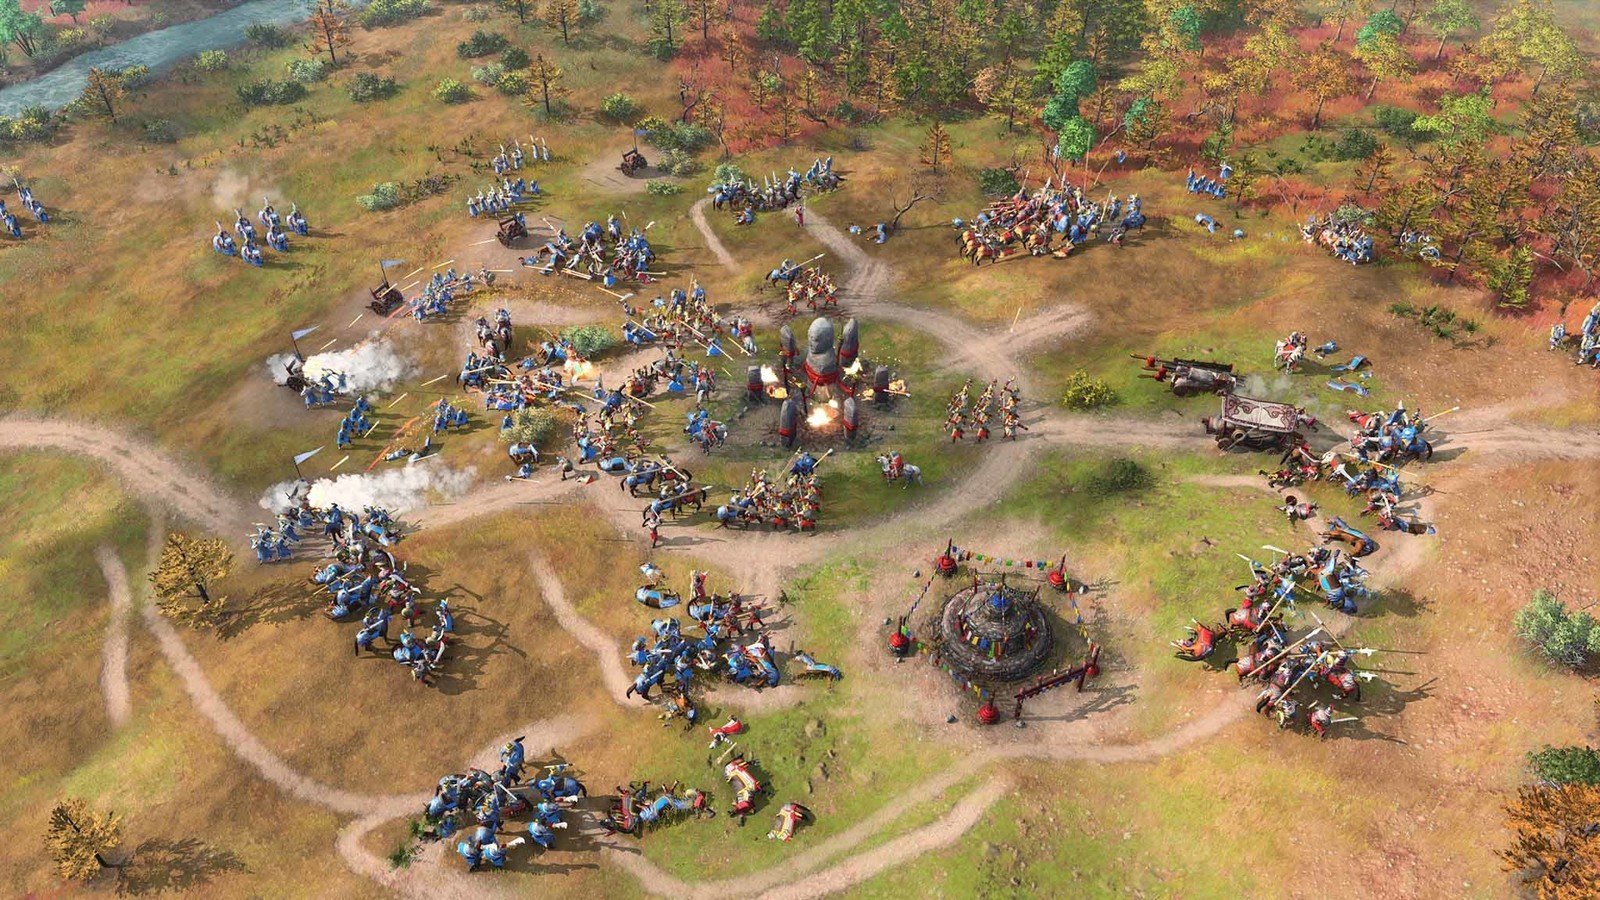 When is the Age of Empires 4 release date?